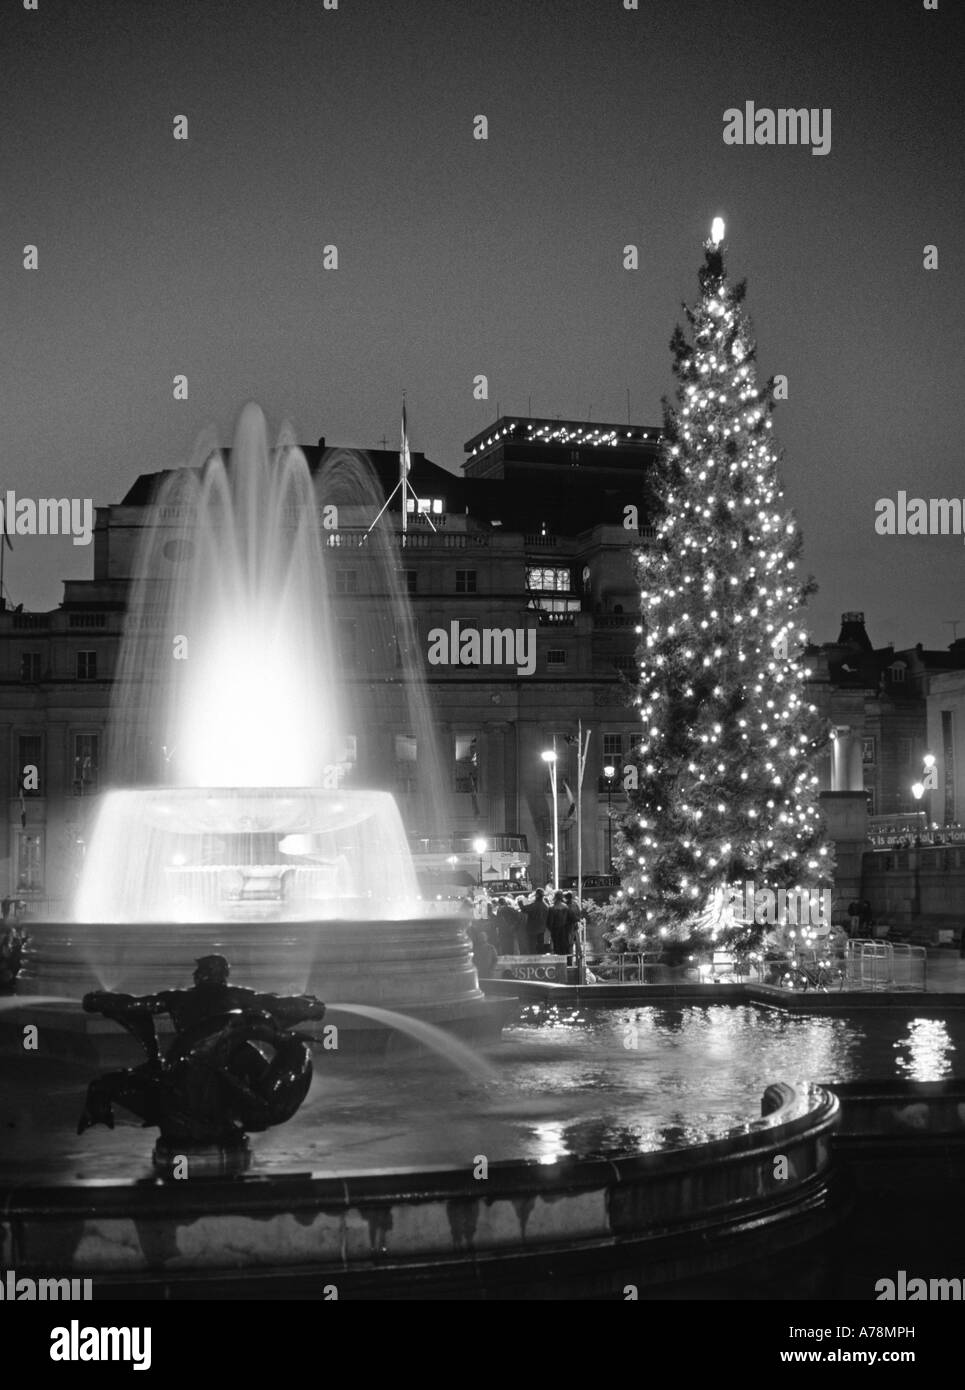 Famous Trafalgar Square Christmas tree gift from City of Oslo lights & decorations illuminated full height water feature fountain London England UK Stock Photo